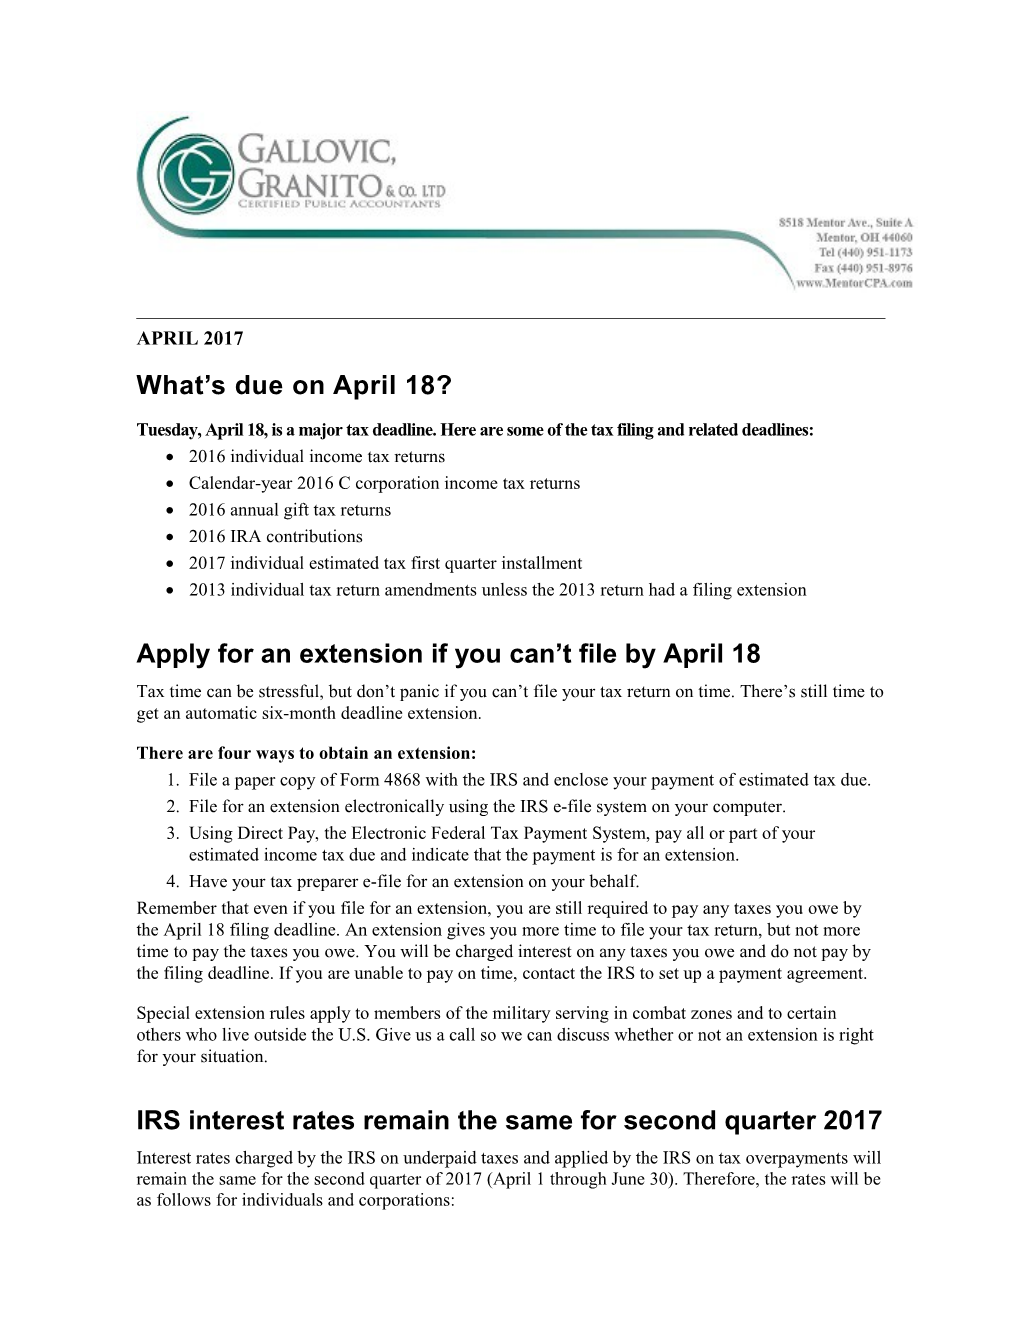 Tuesday, April 18, Is a Major Tax Deadline. Here Are Some of the Tax Filing and Related